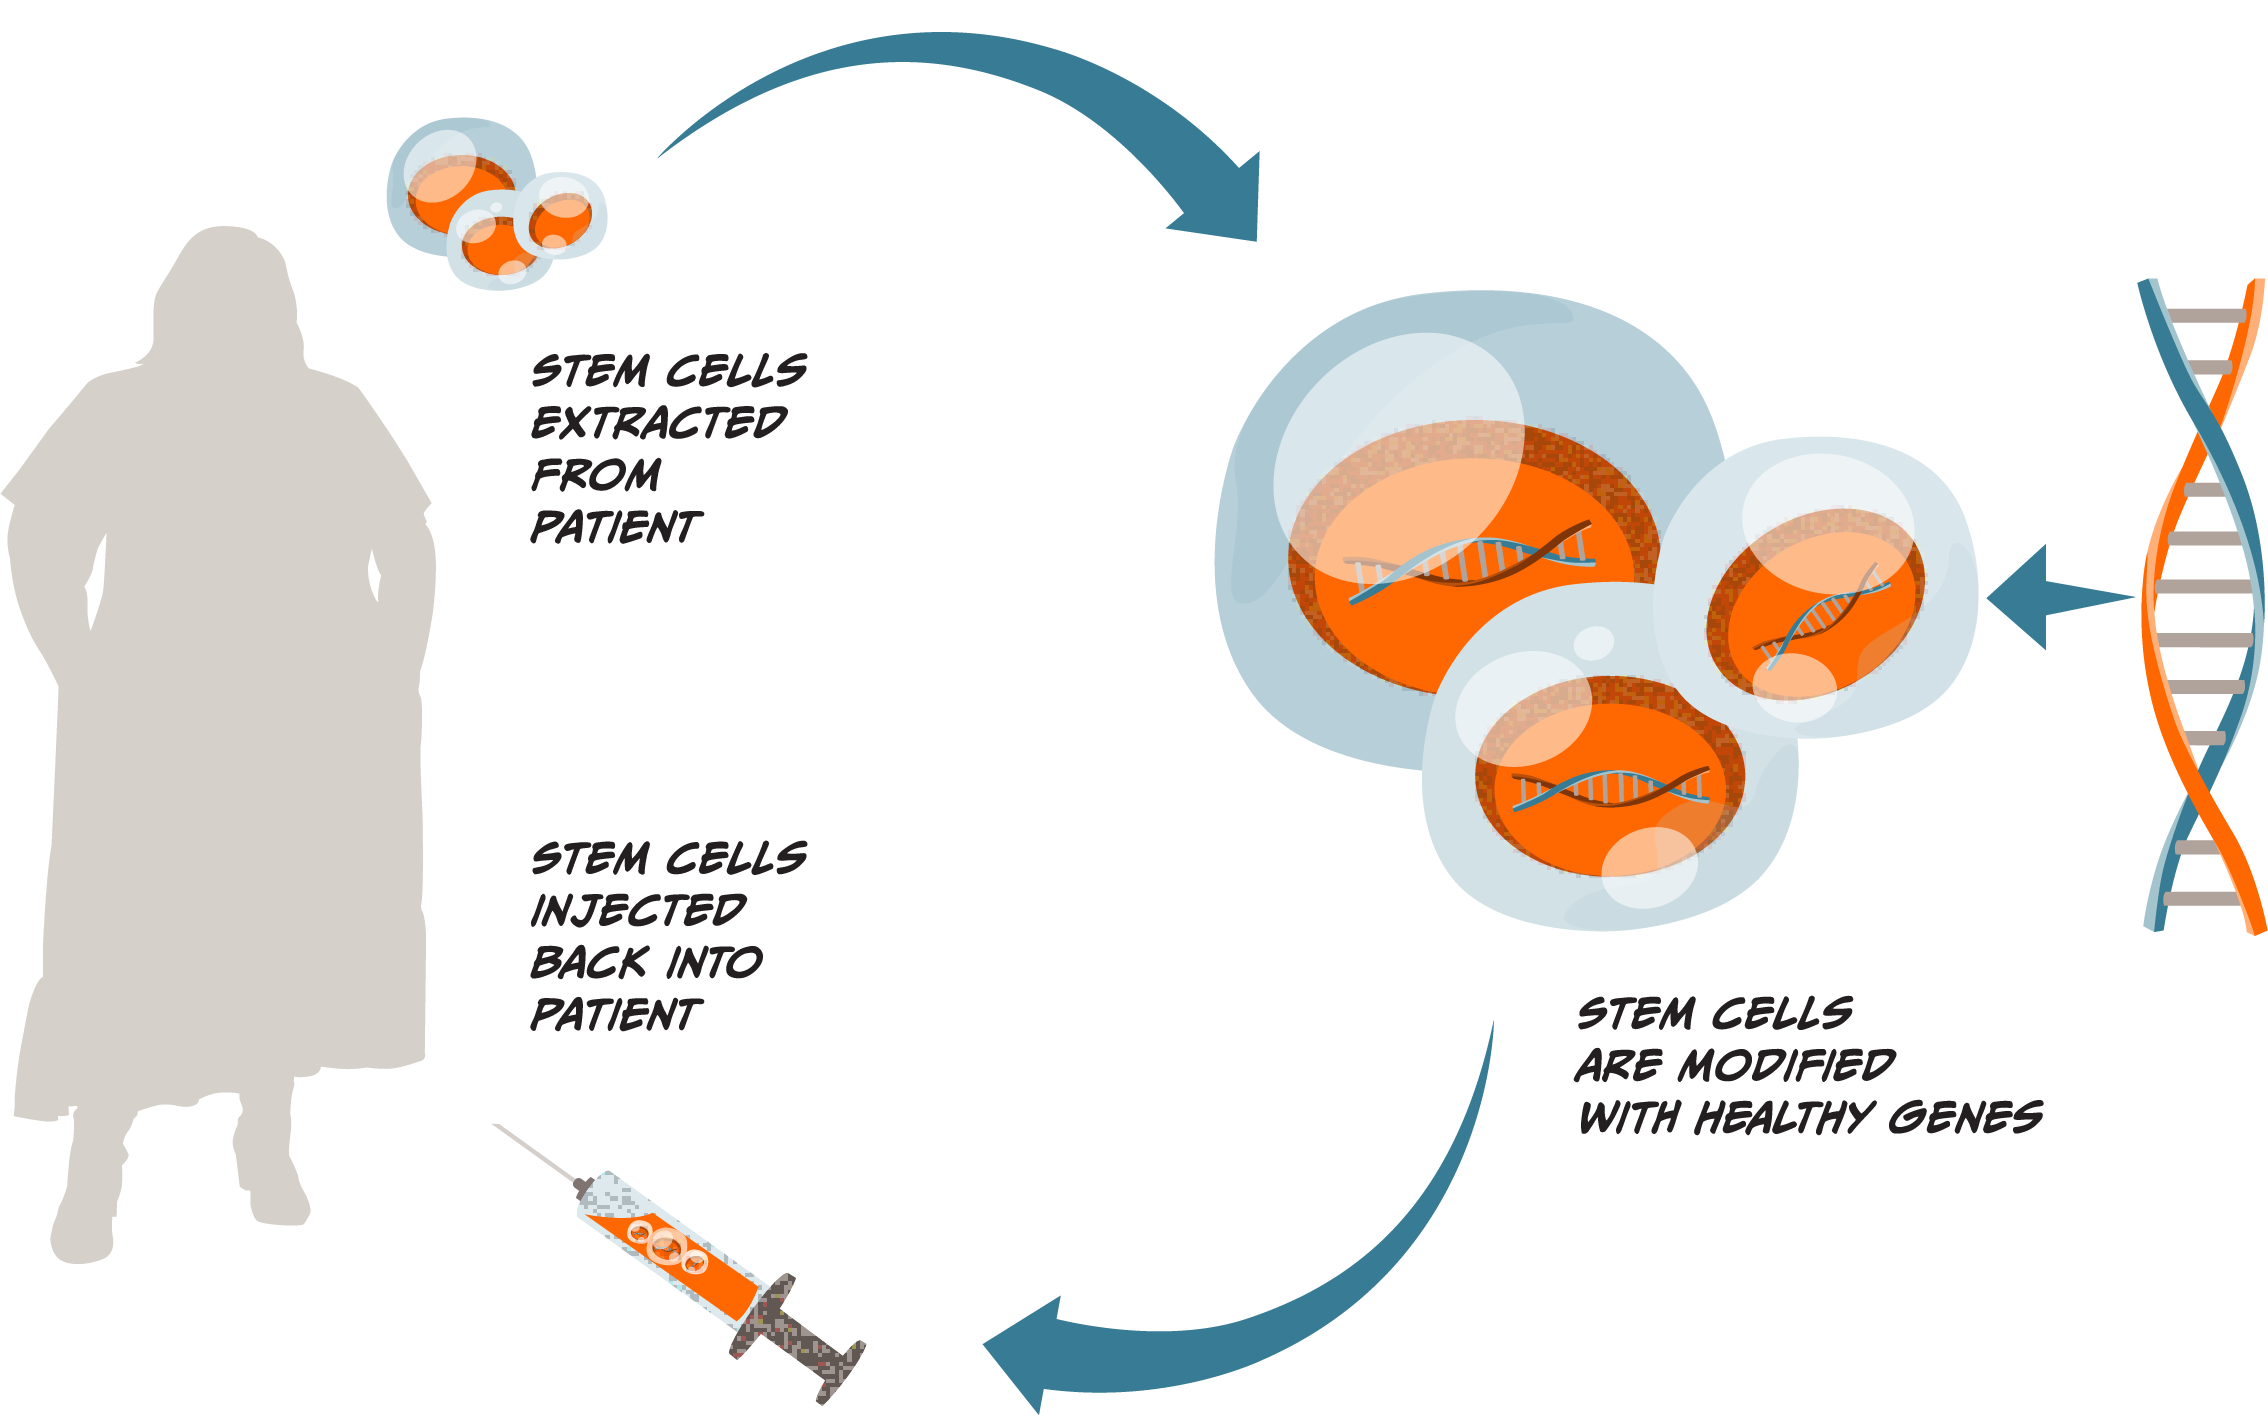 Illustrative diagram showing three steps for how cell-based gene therapy works. One, stem cells are extracted from a patient, the cells and patient are illustrated with an arrow pointing to the next step. Two, stem cells are modified with healthy genes, a larger cluster of stem cells are illustrated, with healthy genes being inserted into them, and an arrow pointing to the final step. Three, stem cells are injected back into the patient, with a syringe illustrated near the illustration of the patient.